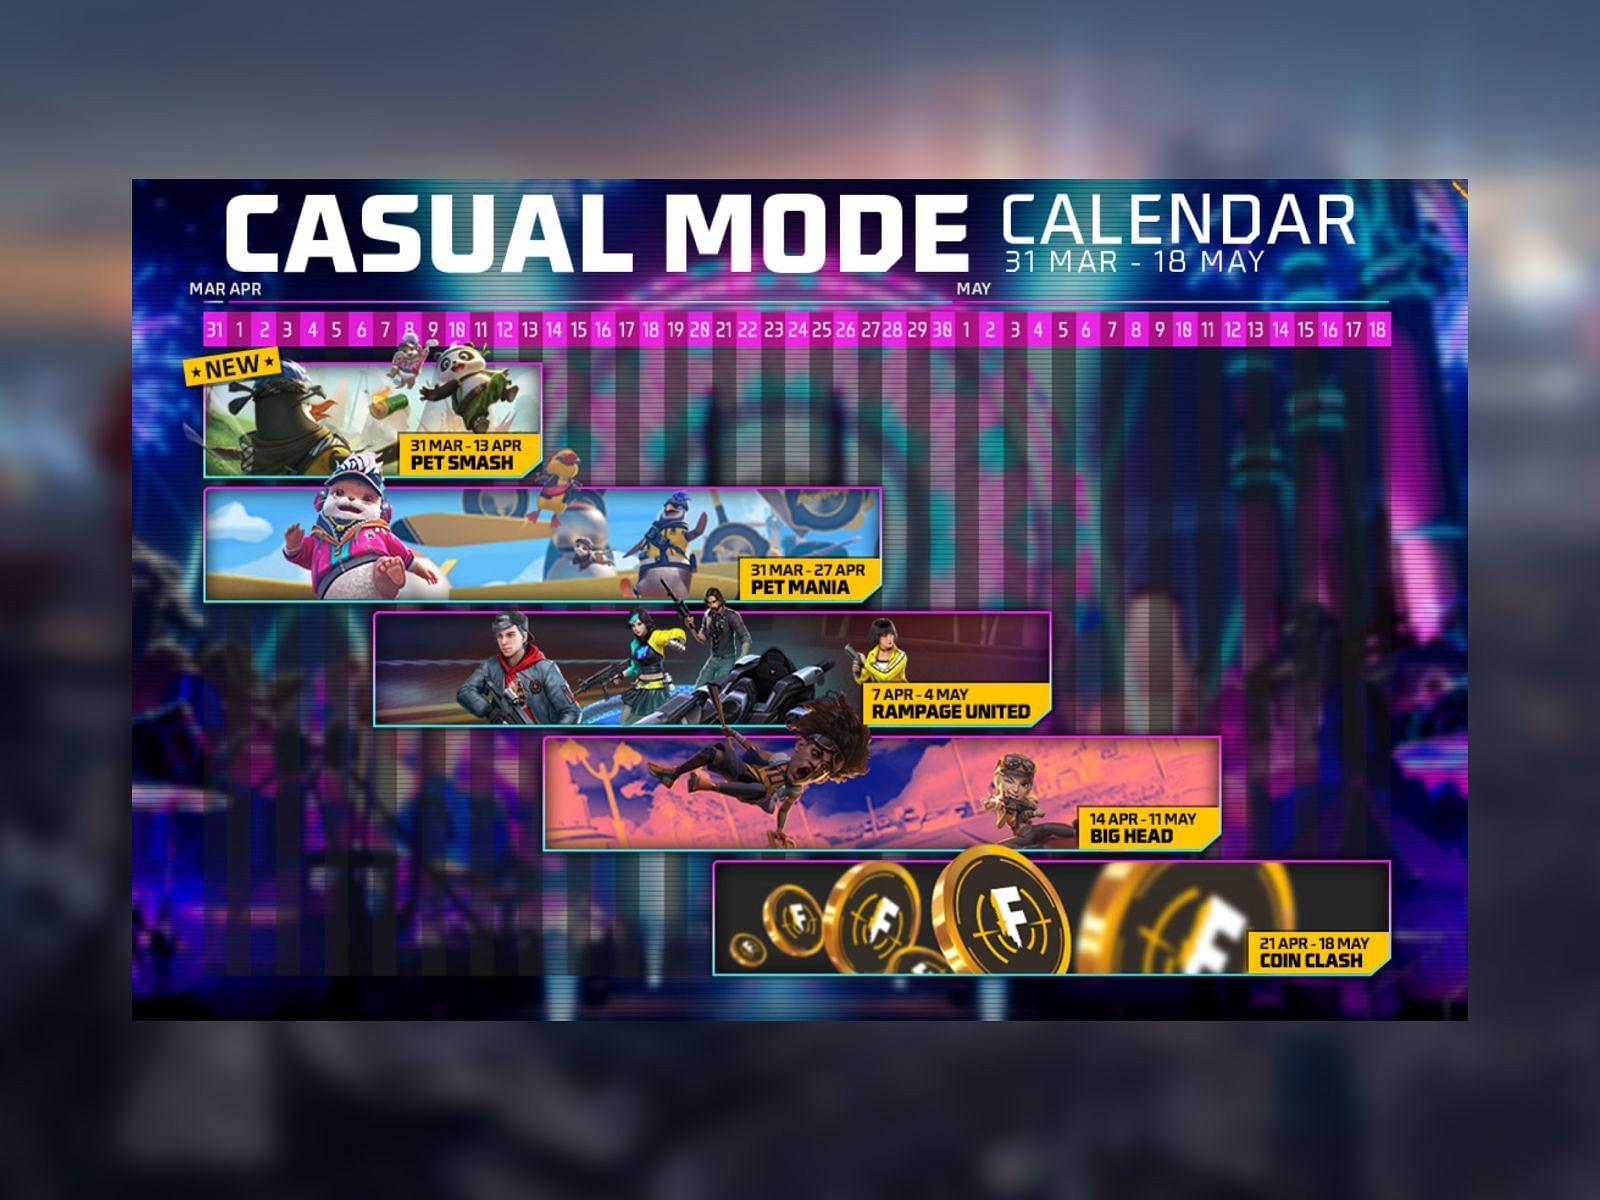 New calendar unveiled in Free Fire MAX about Casual Modes (Image via Garena)